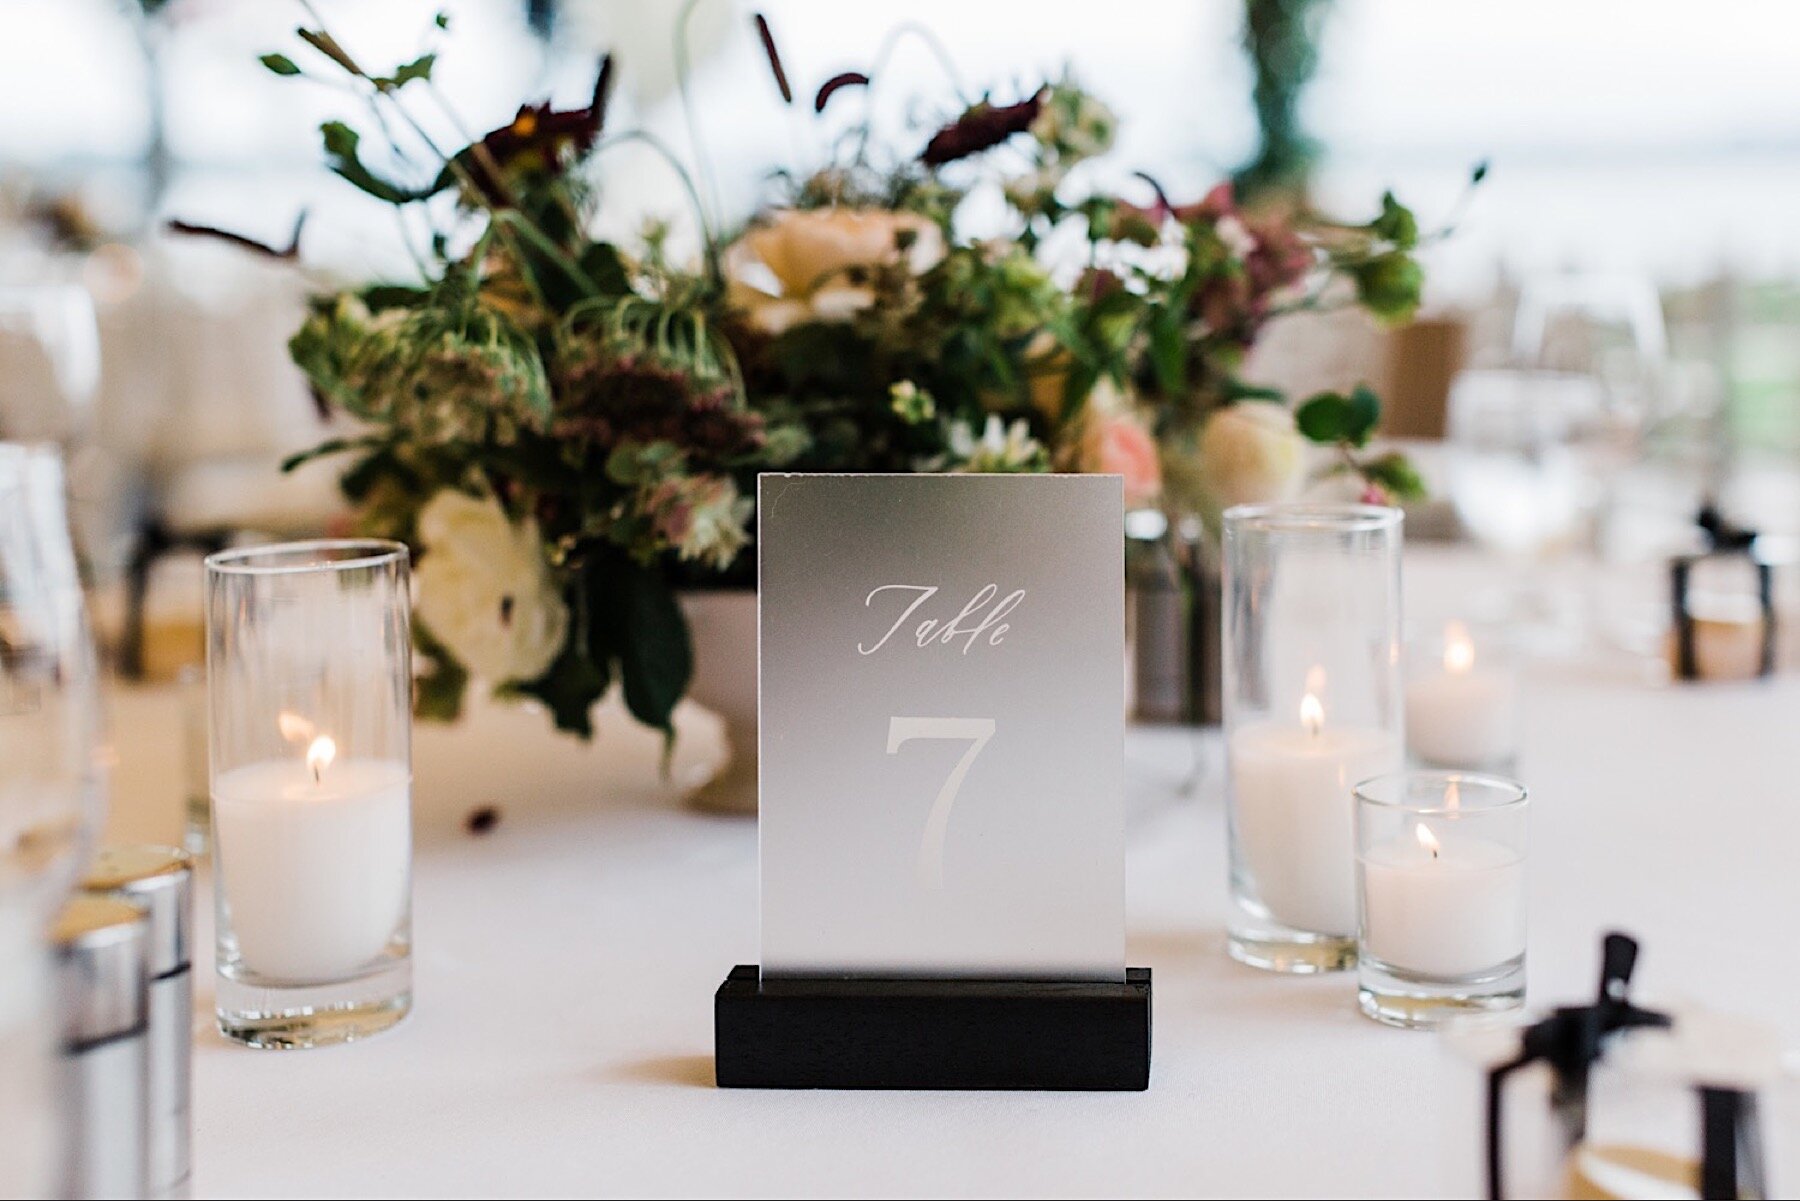 20_shaxton-ngo-422_A_Woodmark_floral_top_with_Florist_Gather_Design_from_Company_at_romantic_the_wedding_lush_Seattle_Wedding_design_Hotel.jpg